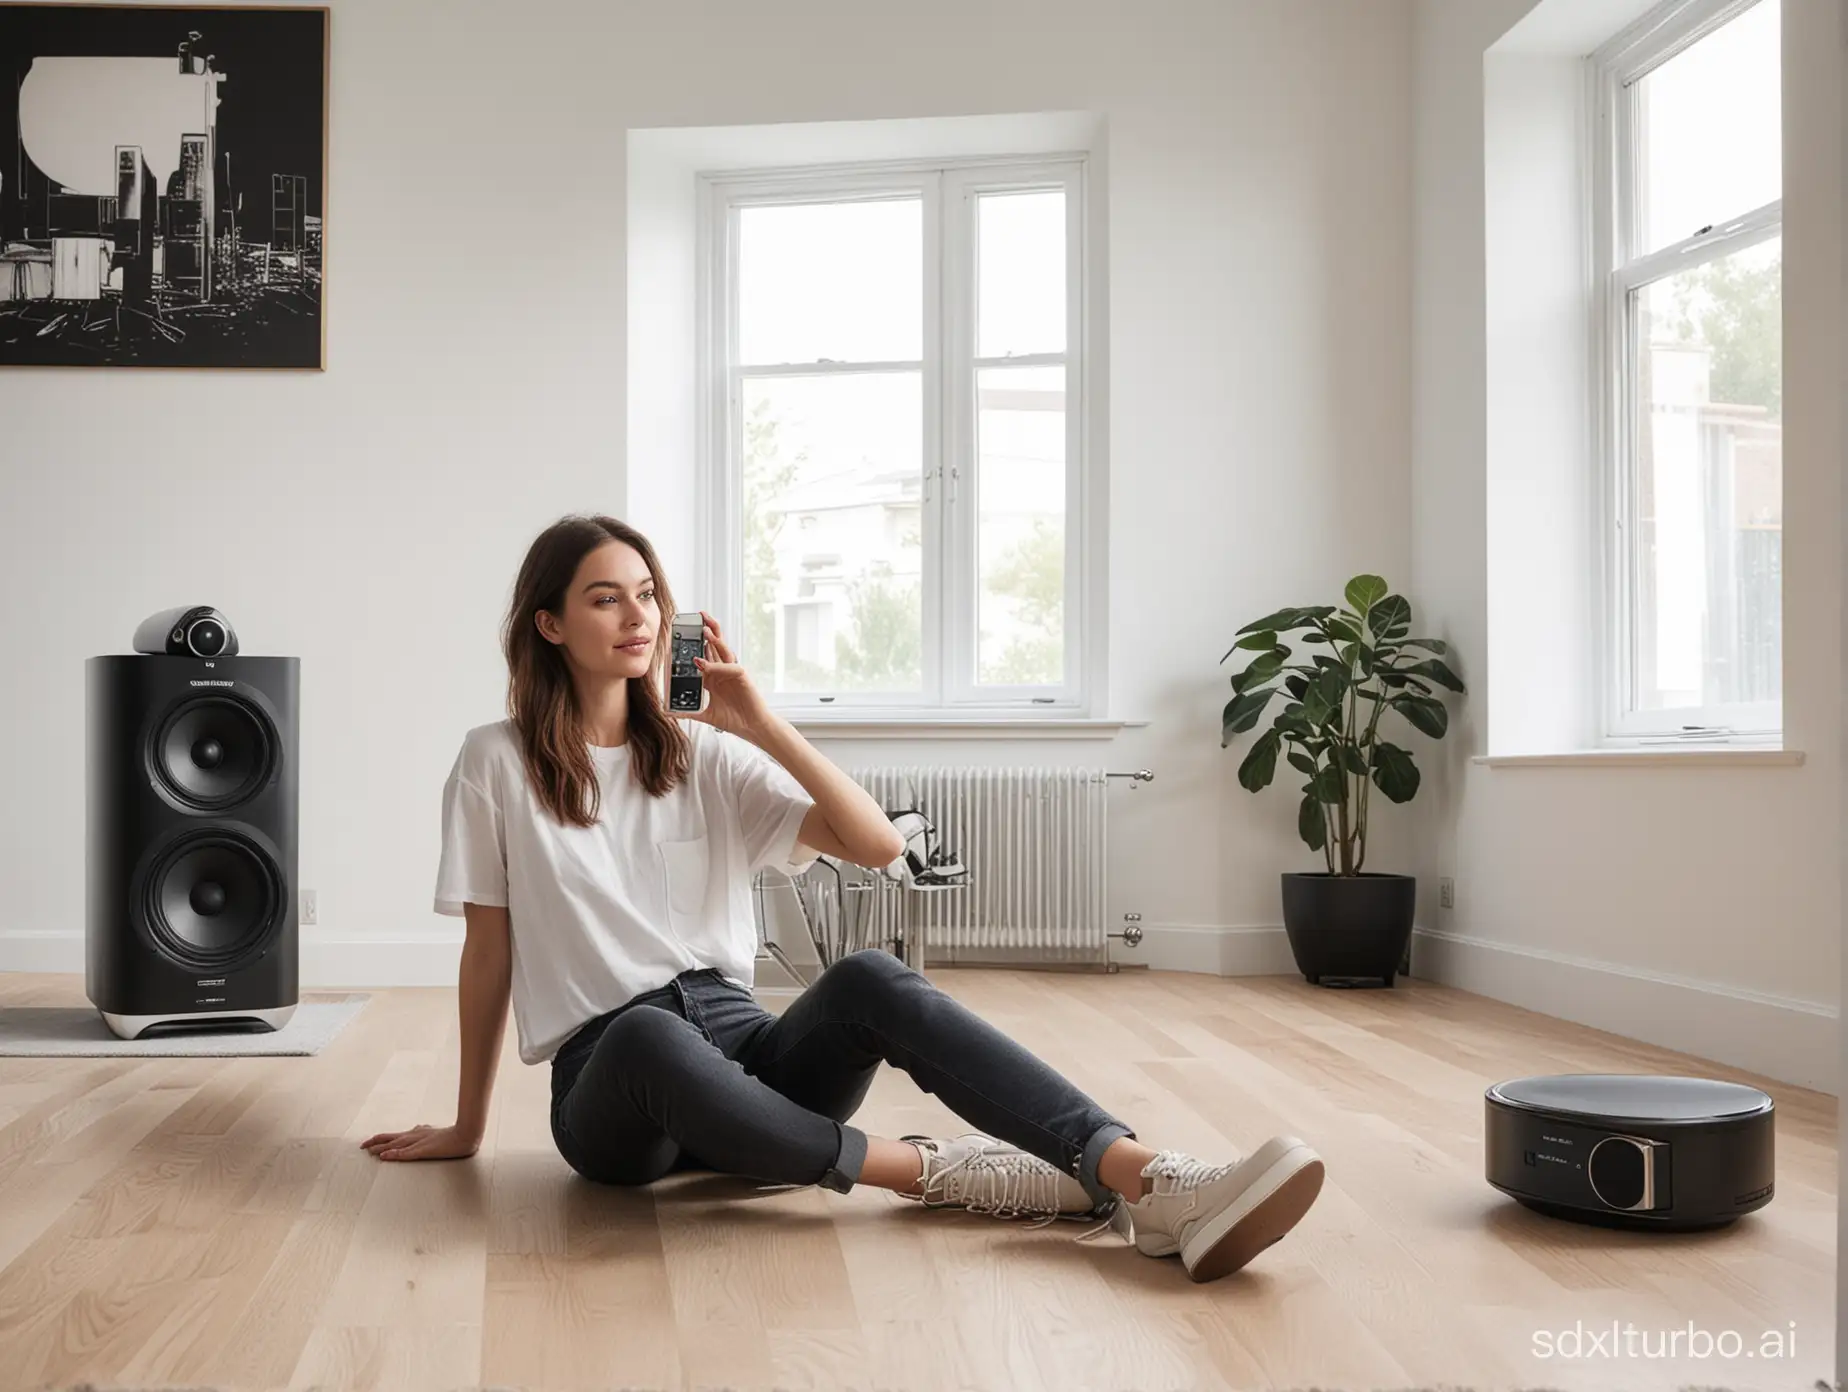 Girl-Taking-Selfie-with-Bowers-Wilkins-802-d3-Speaker-and-McIntosh-Amplifier